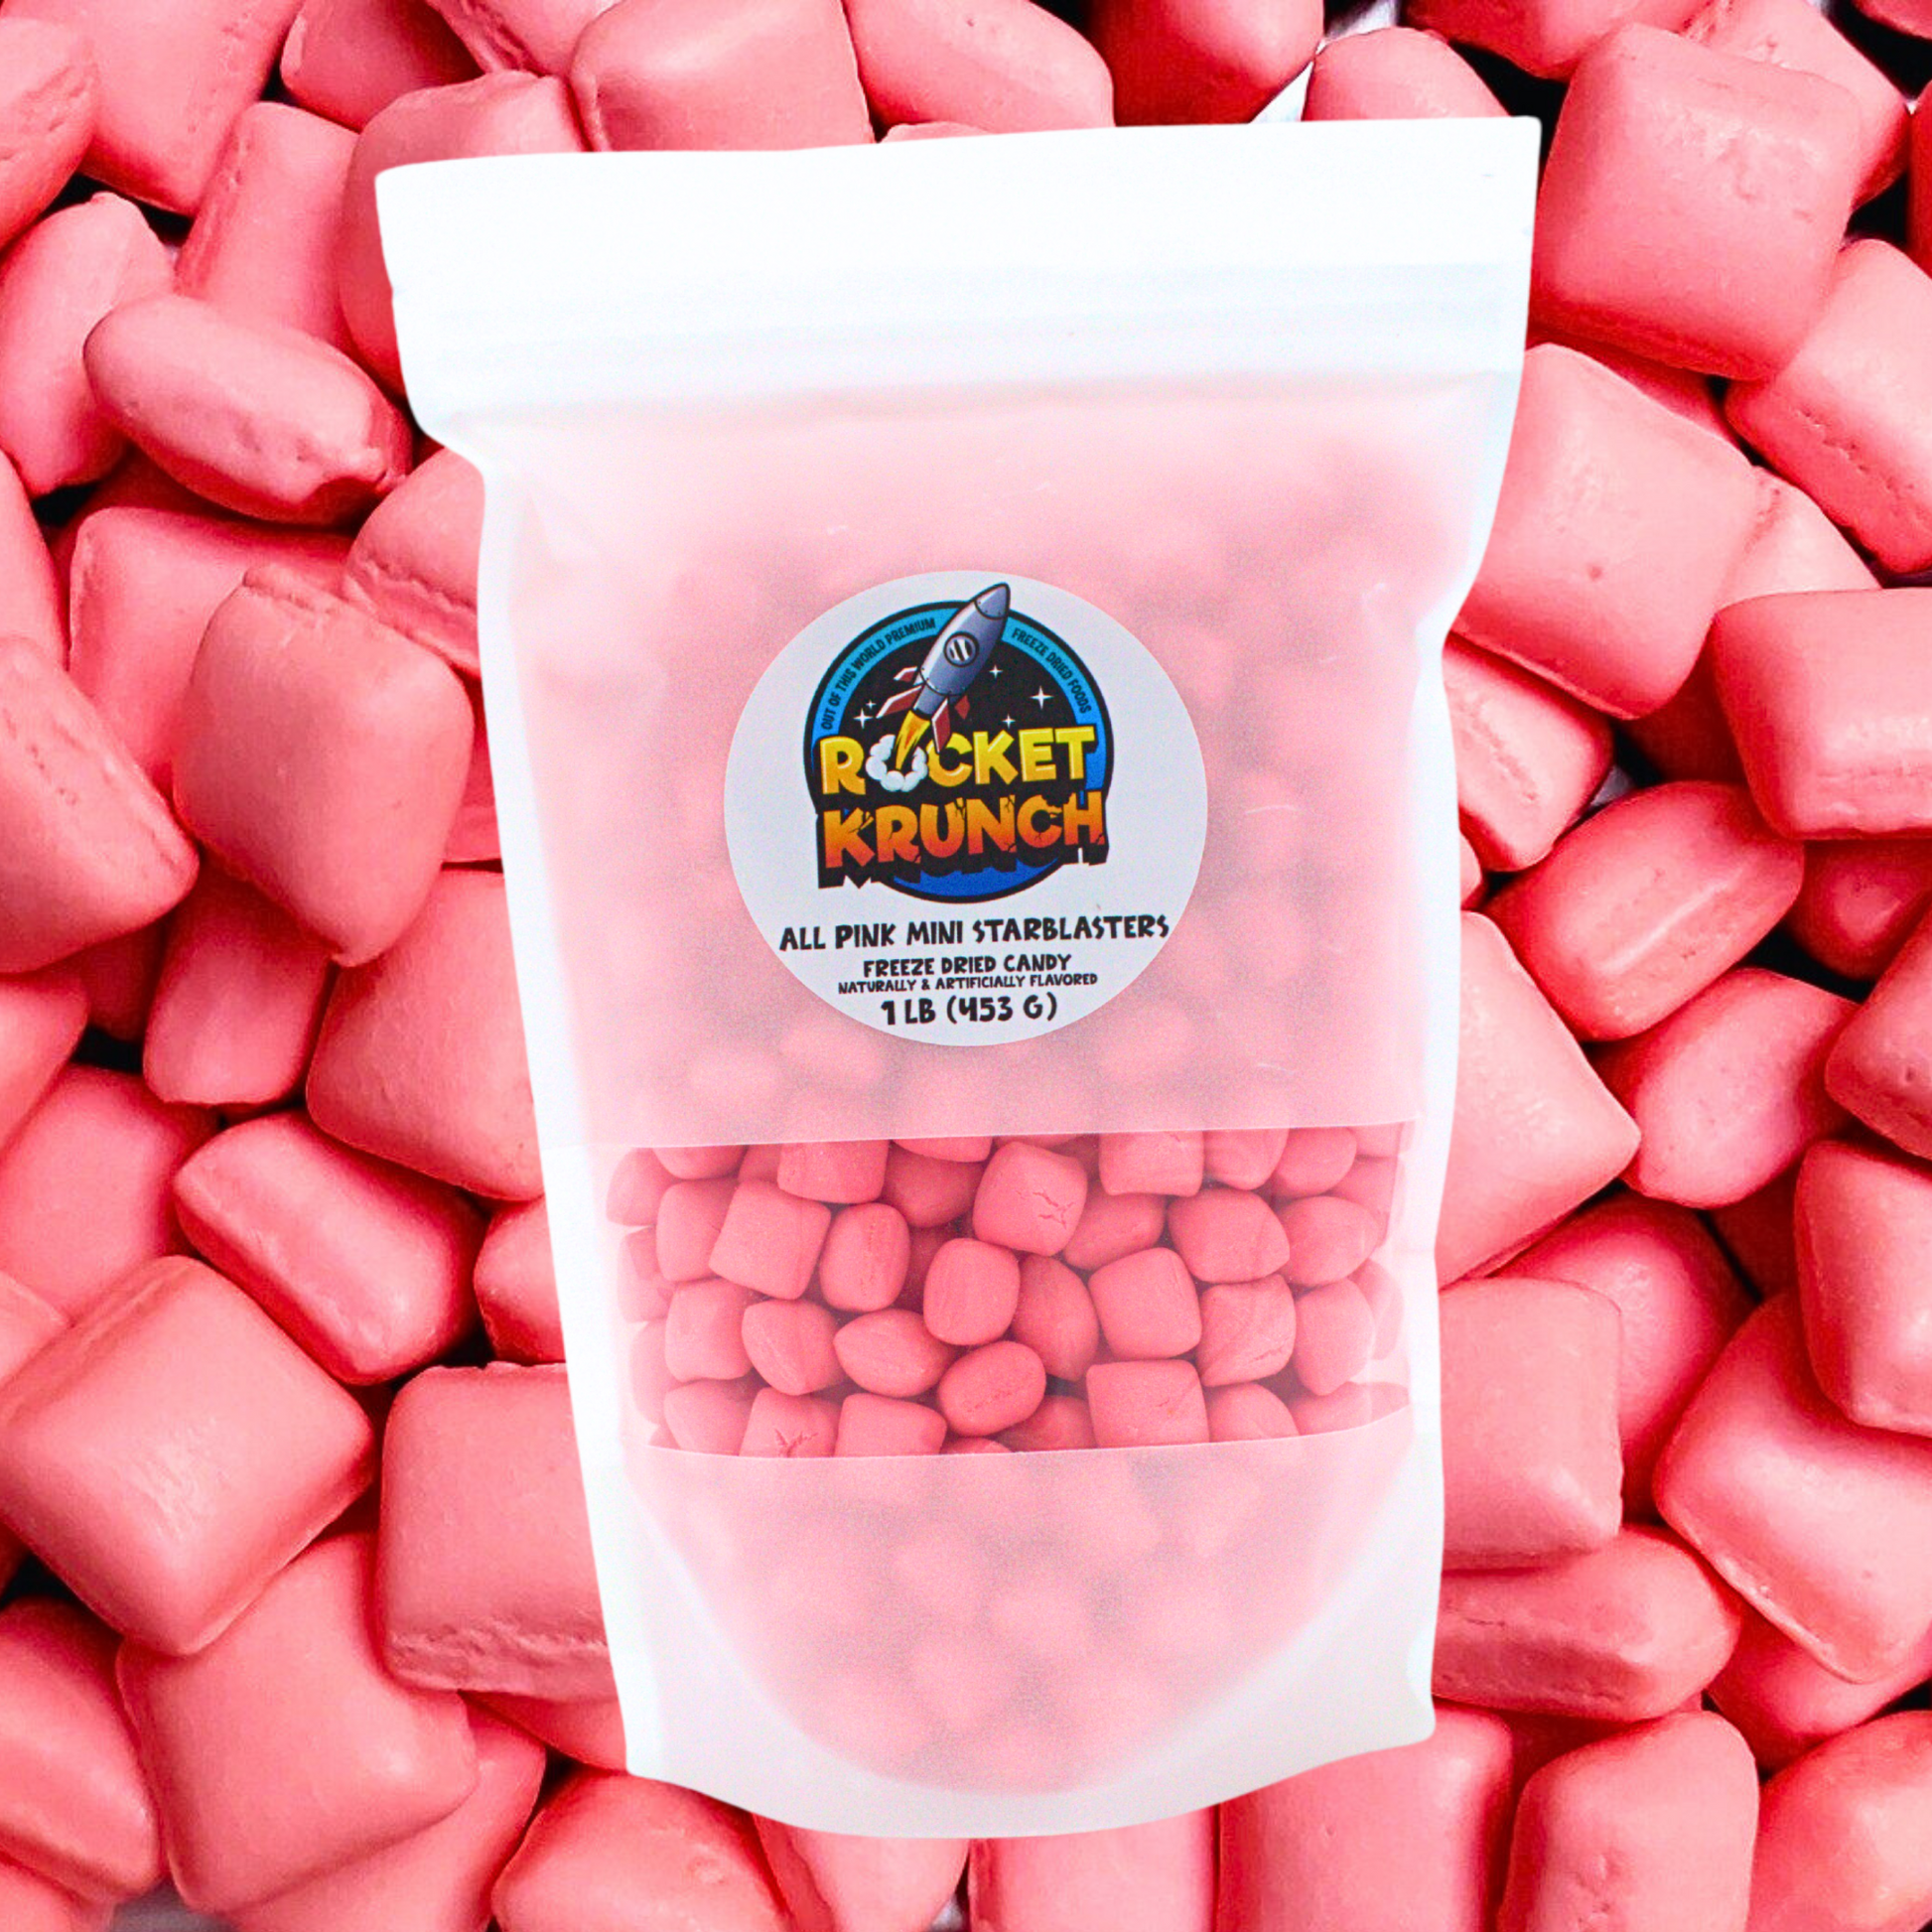 Pink Starblasters Freeze Dried Candy store